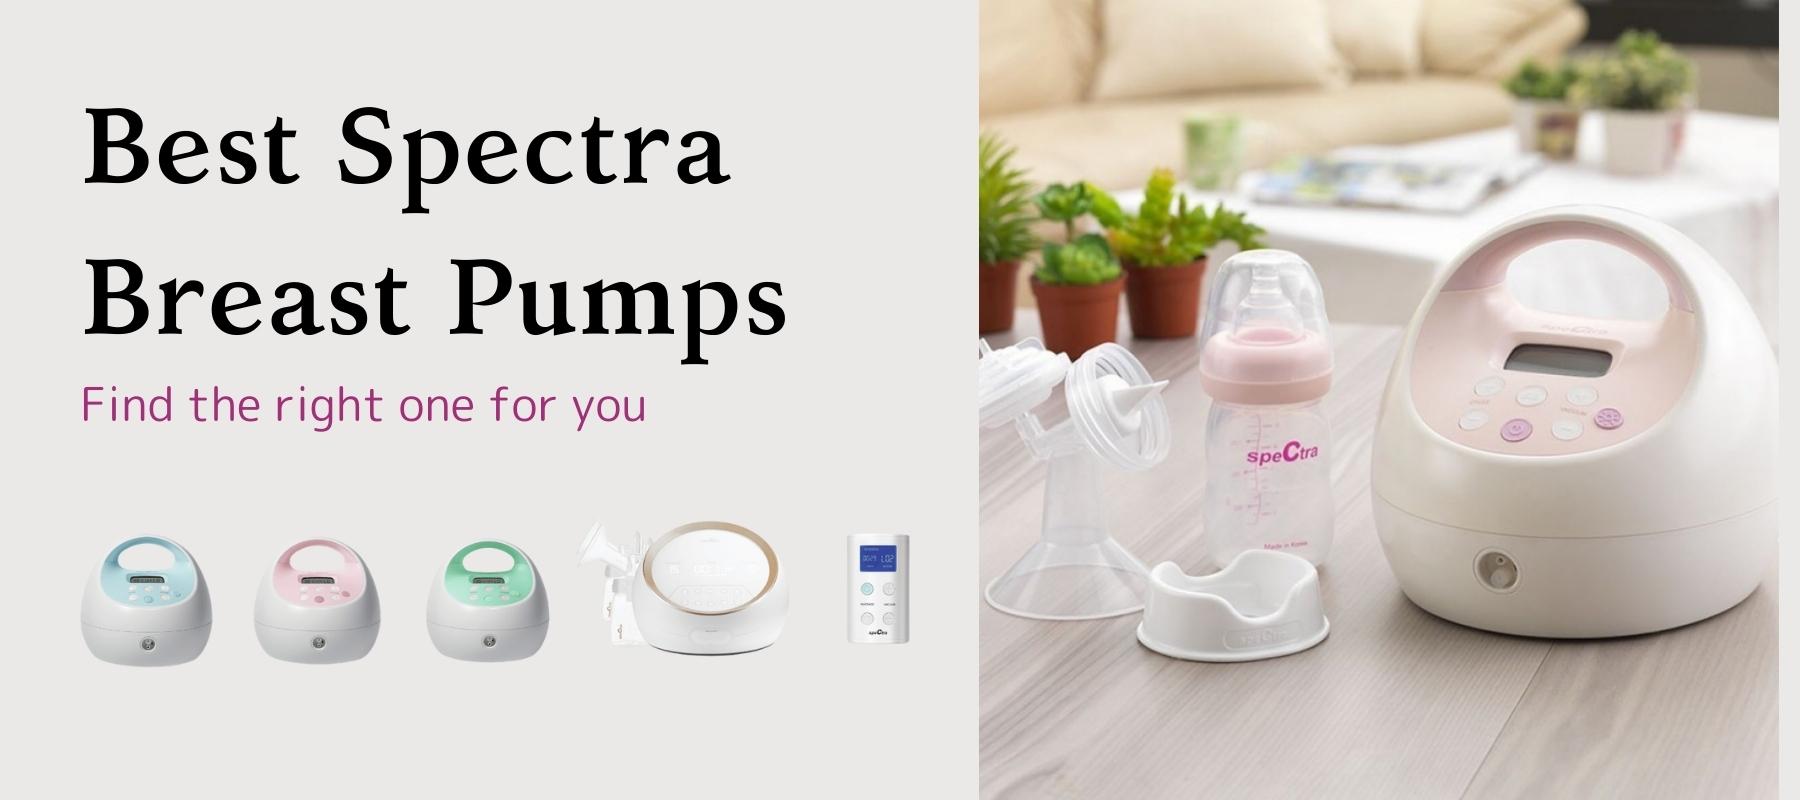 Best Spectra Breast Pumps: Find the Right One for You –